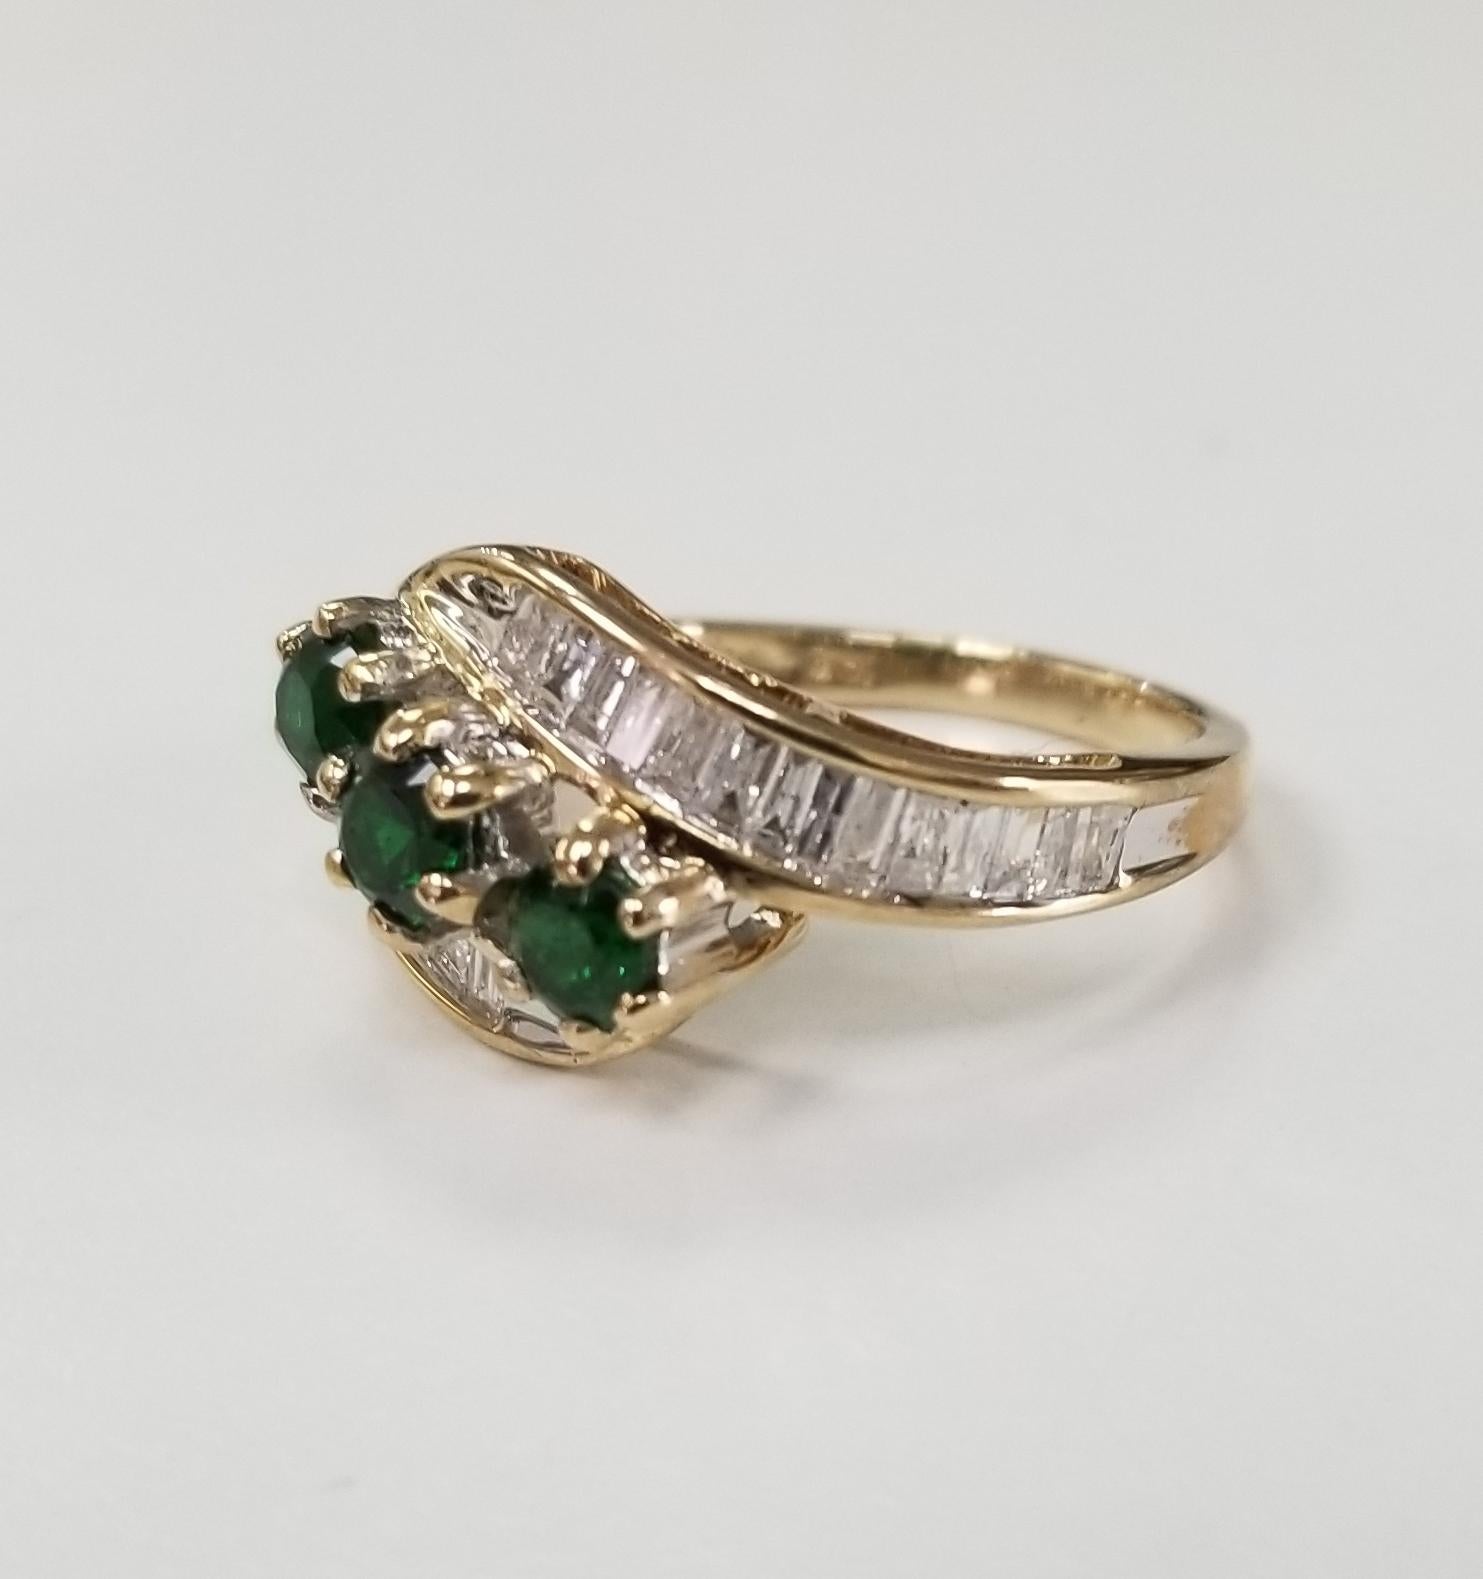 10k yellow gold tsavorite and diamond ring, containing 3 round tsavorite weighing 1.00cts. and 24 baguette cut diamonds weighing .70pts.  This ring is a size 7 but we will size to fit for free.

Tsavorite is a trade name for the emerald-green